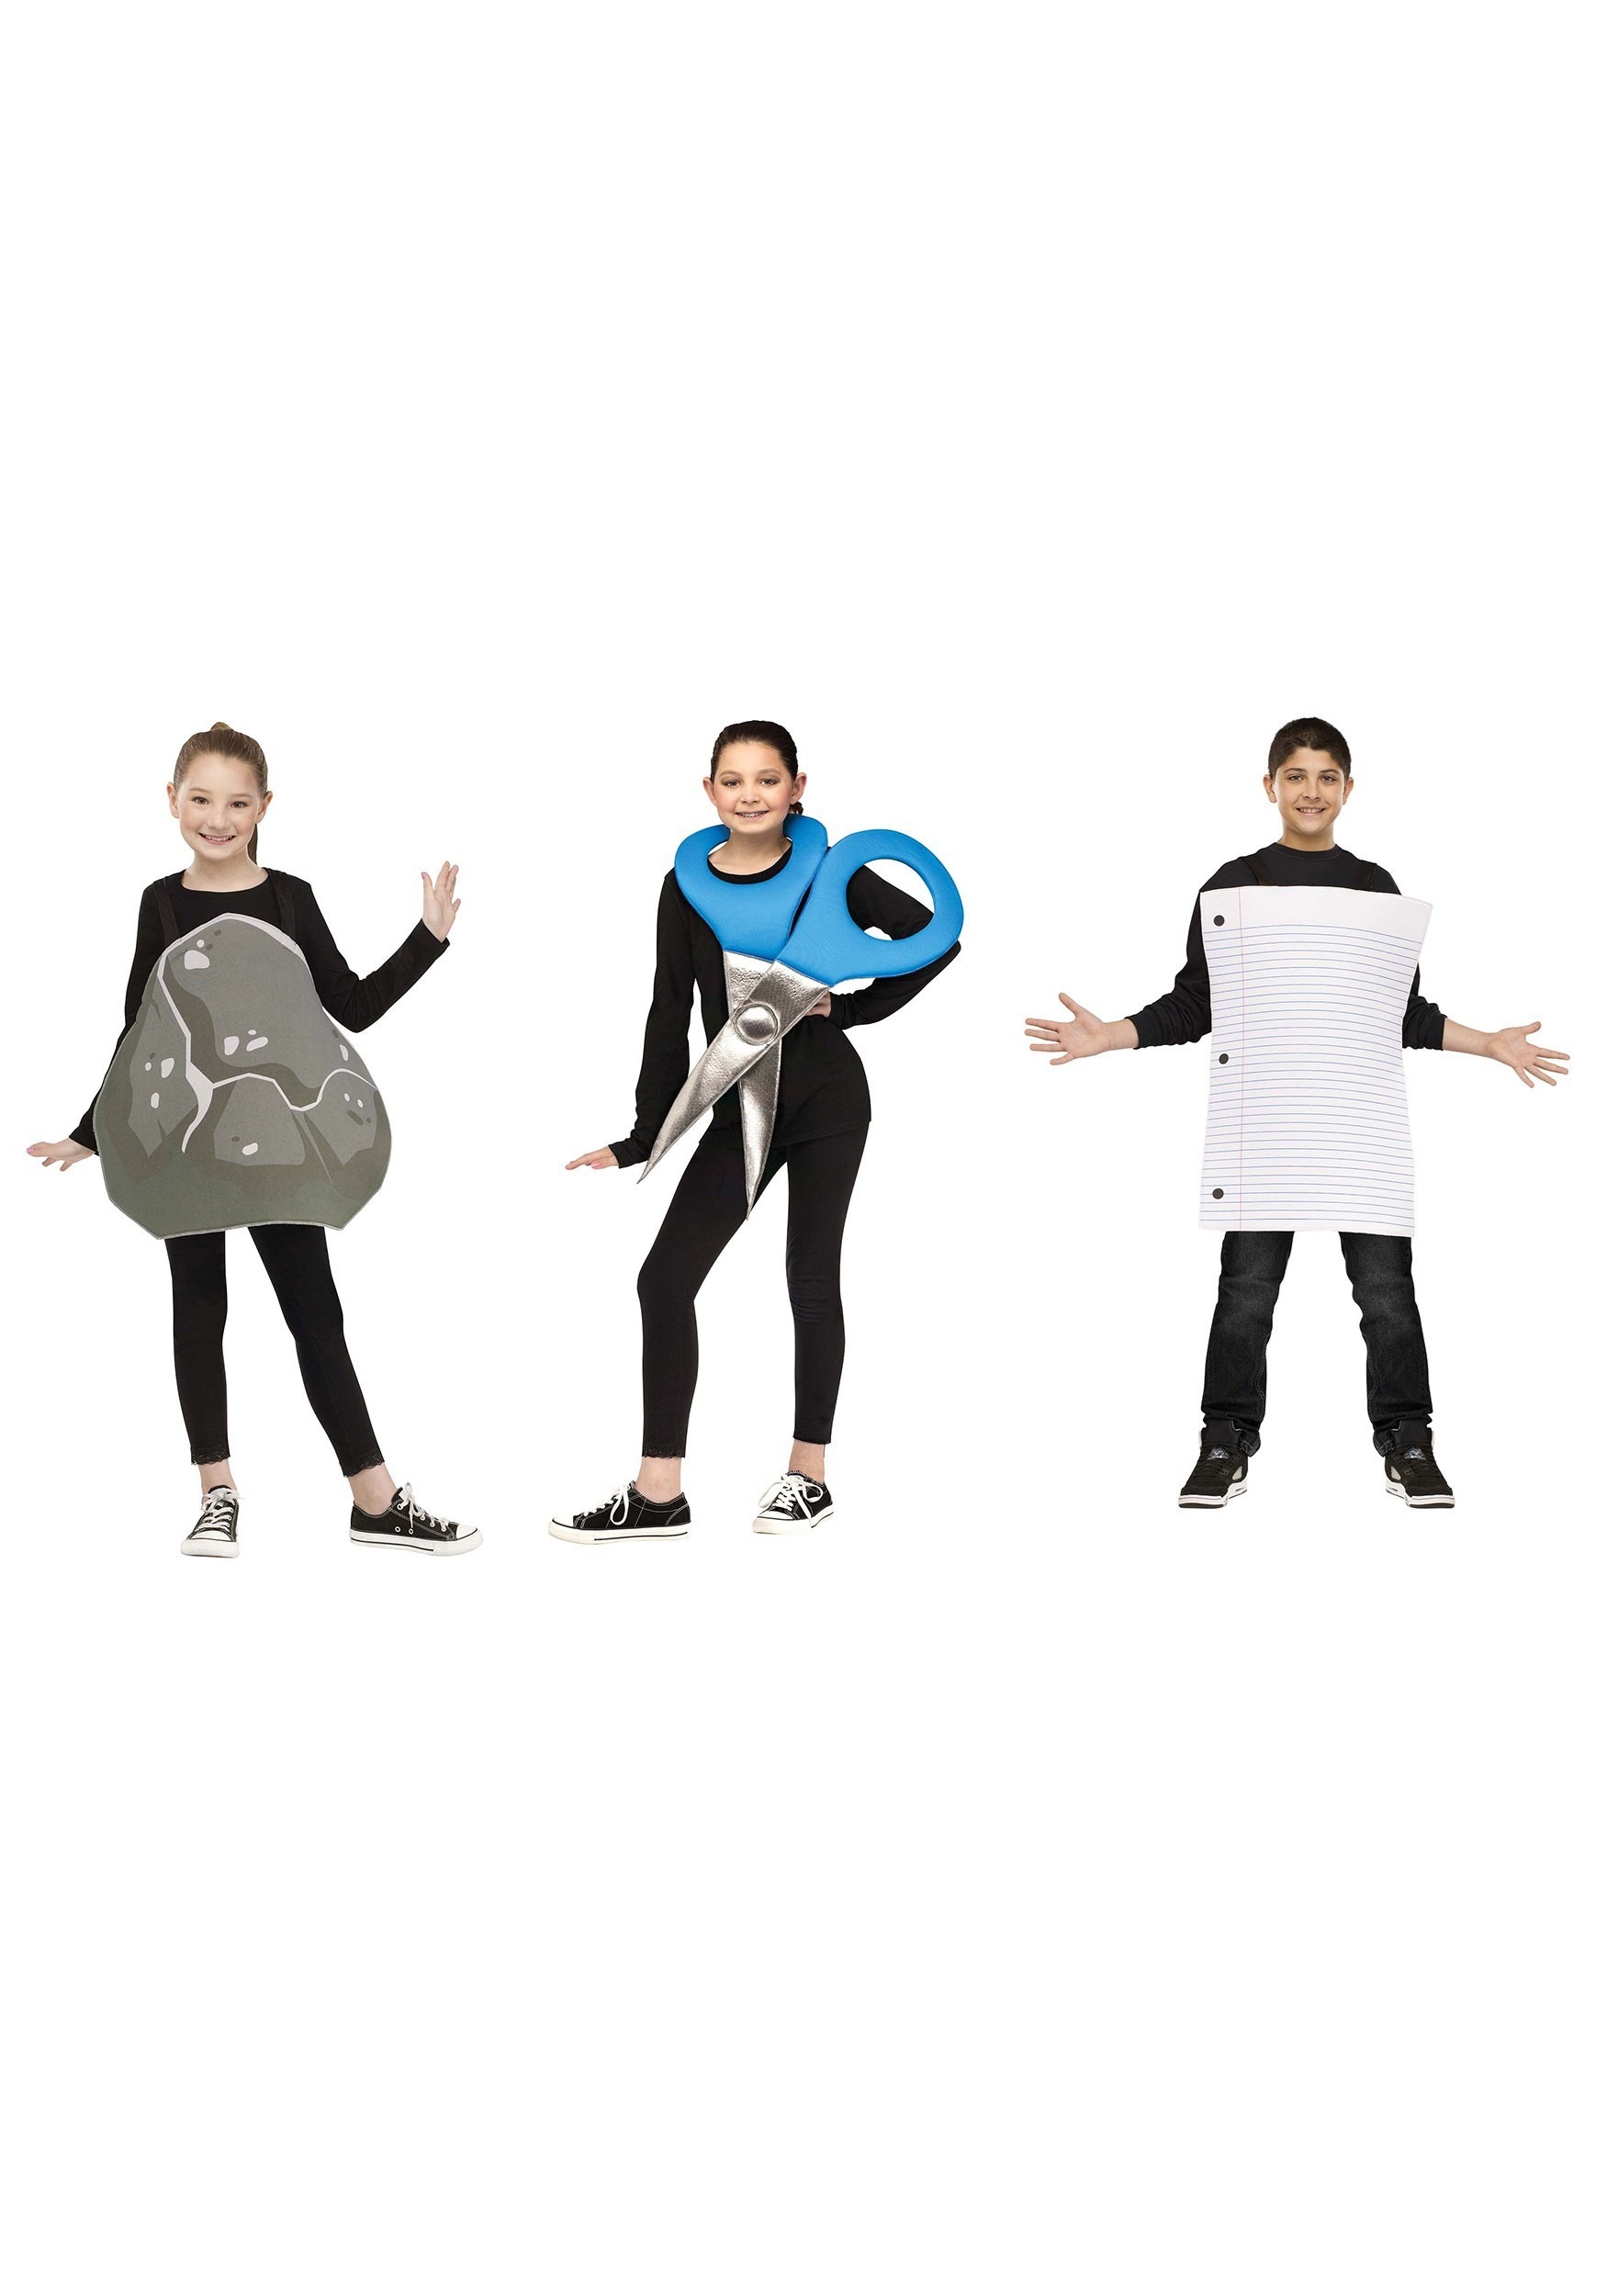 Fun World Adult Rock Paper Scissors Group Costume - Grey/Blue/White - One Size